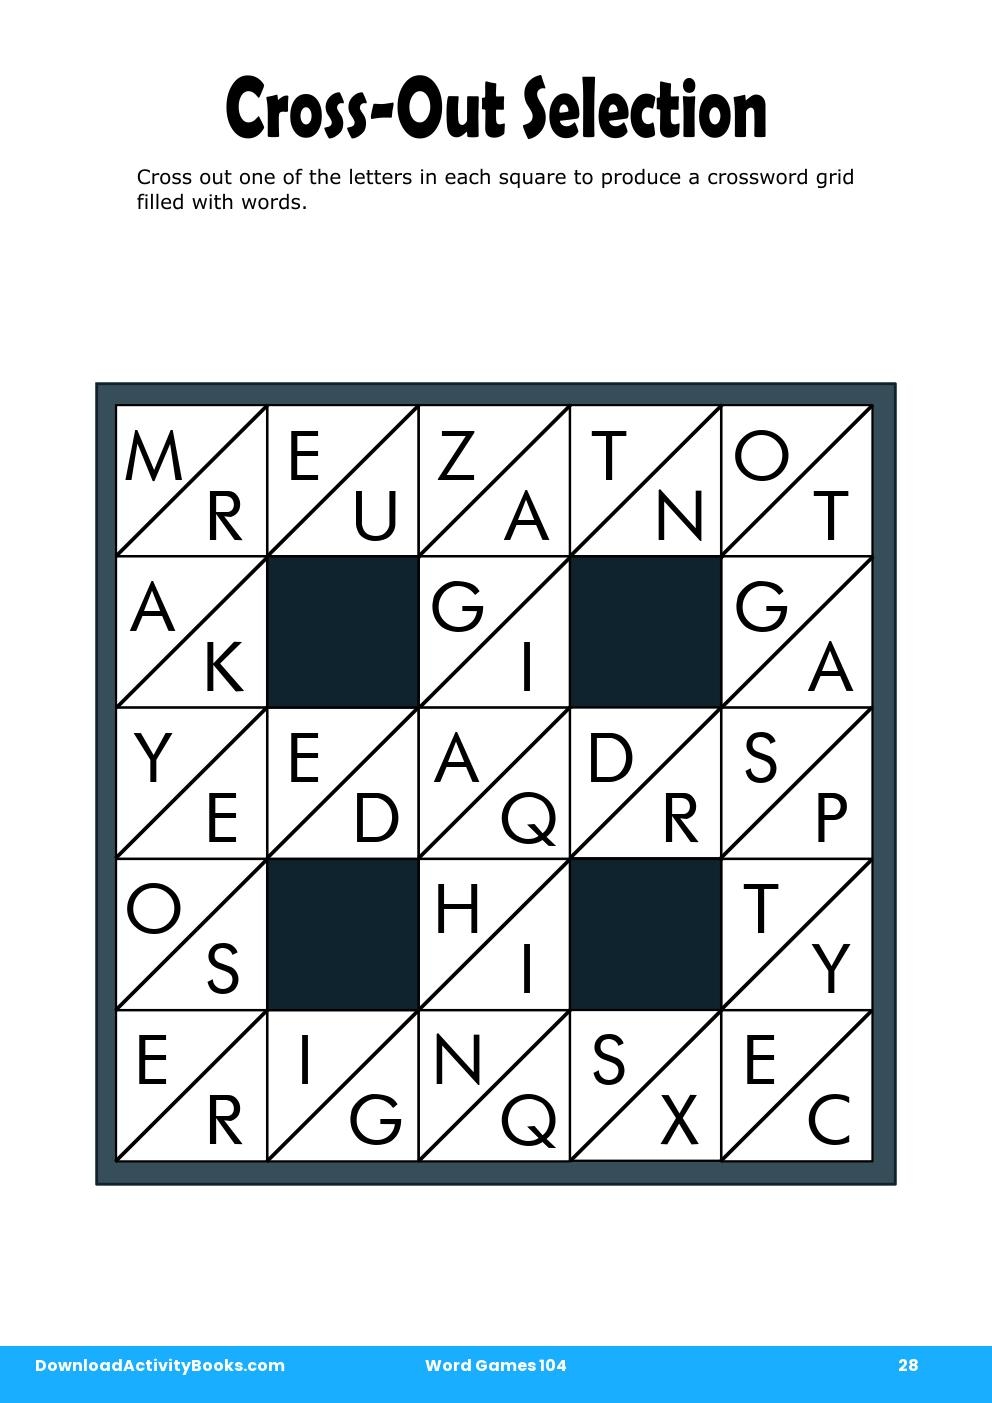 Cross-Out Selection in Word Games 104